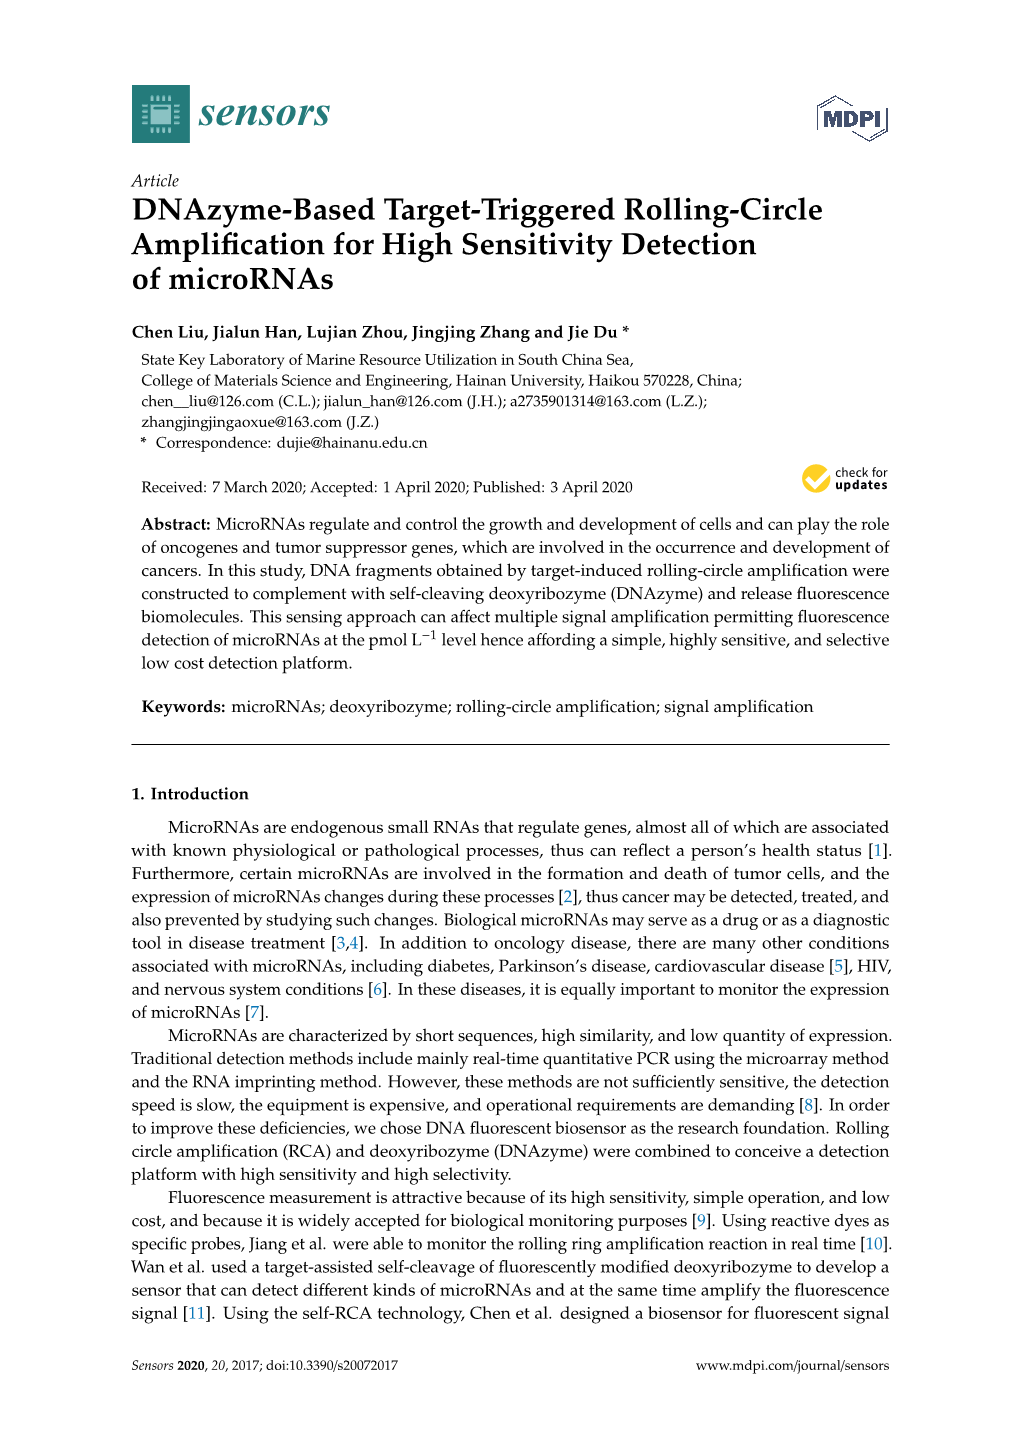 Dnazyme-Based Target-Triggered Rolling-Circle Amplification for High Sensitivity Detection of Micrornas